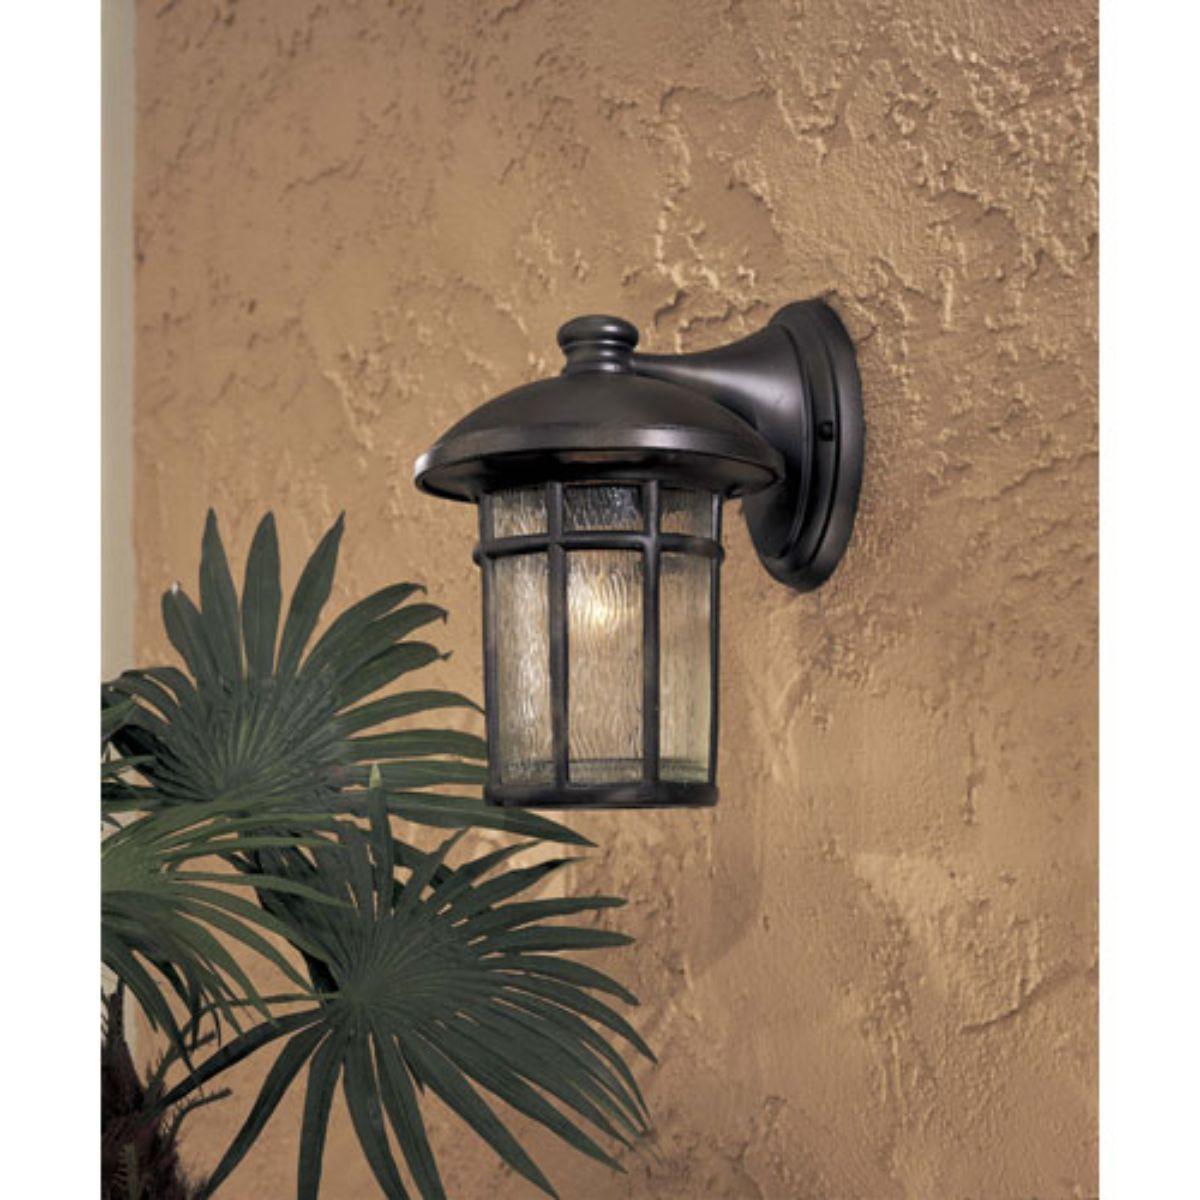 Cranston 13 in. Outdoor Wall Sconce Heritage Finish